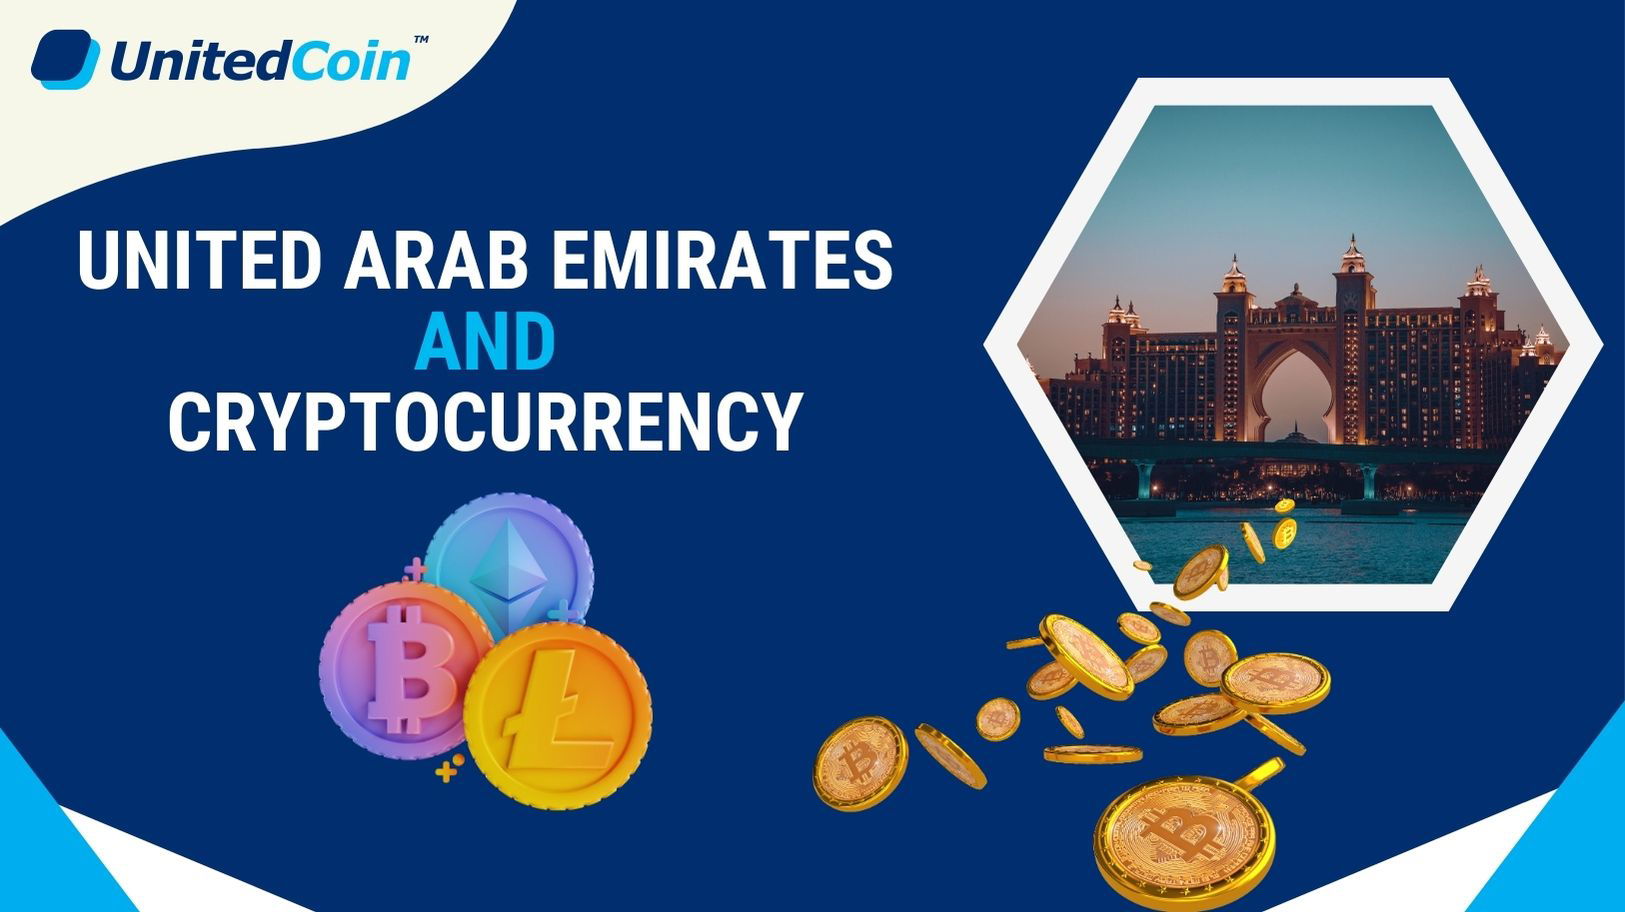 The United Arab Emirates and Cryptocurrency